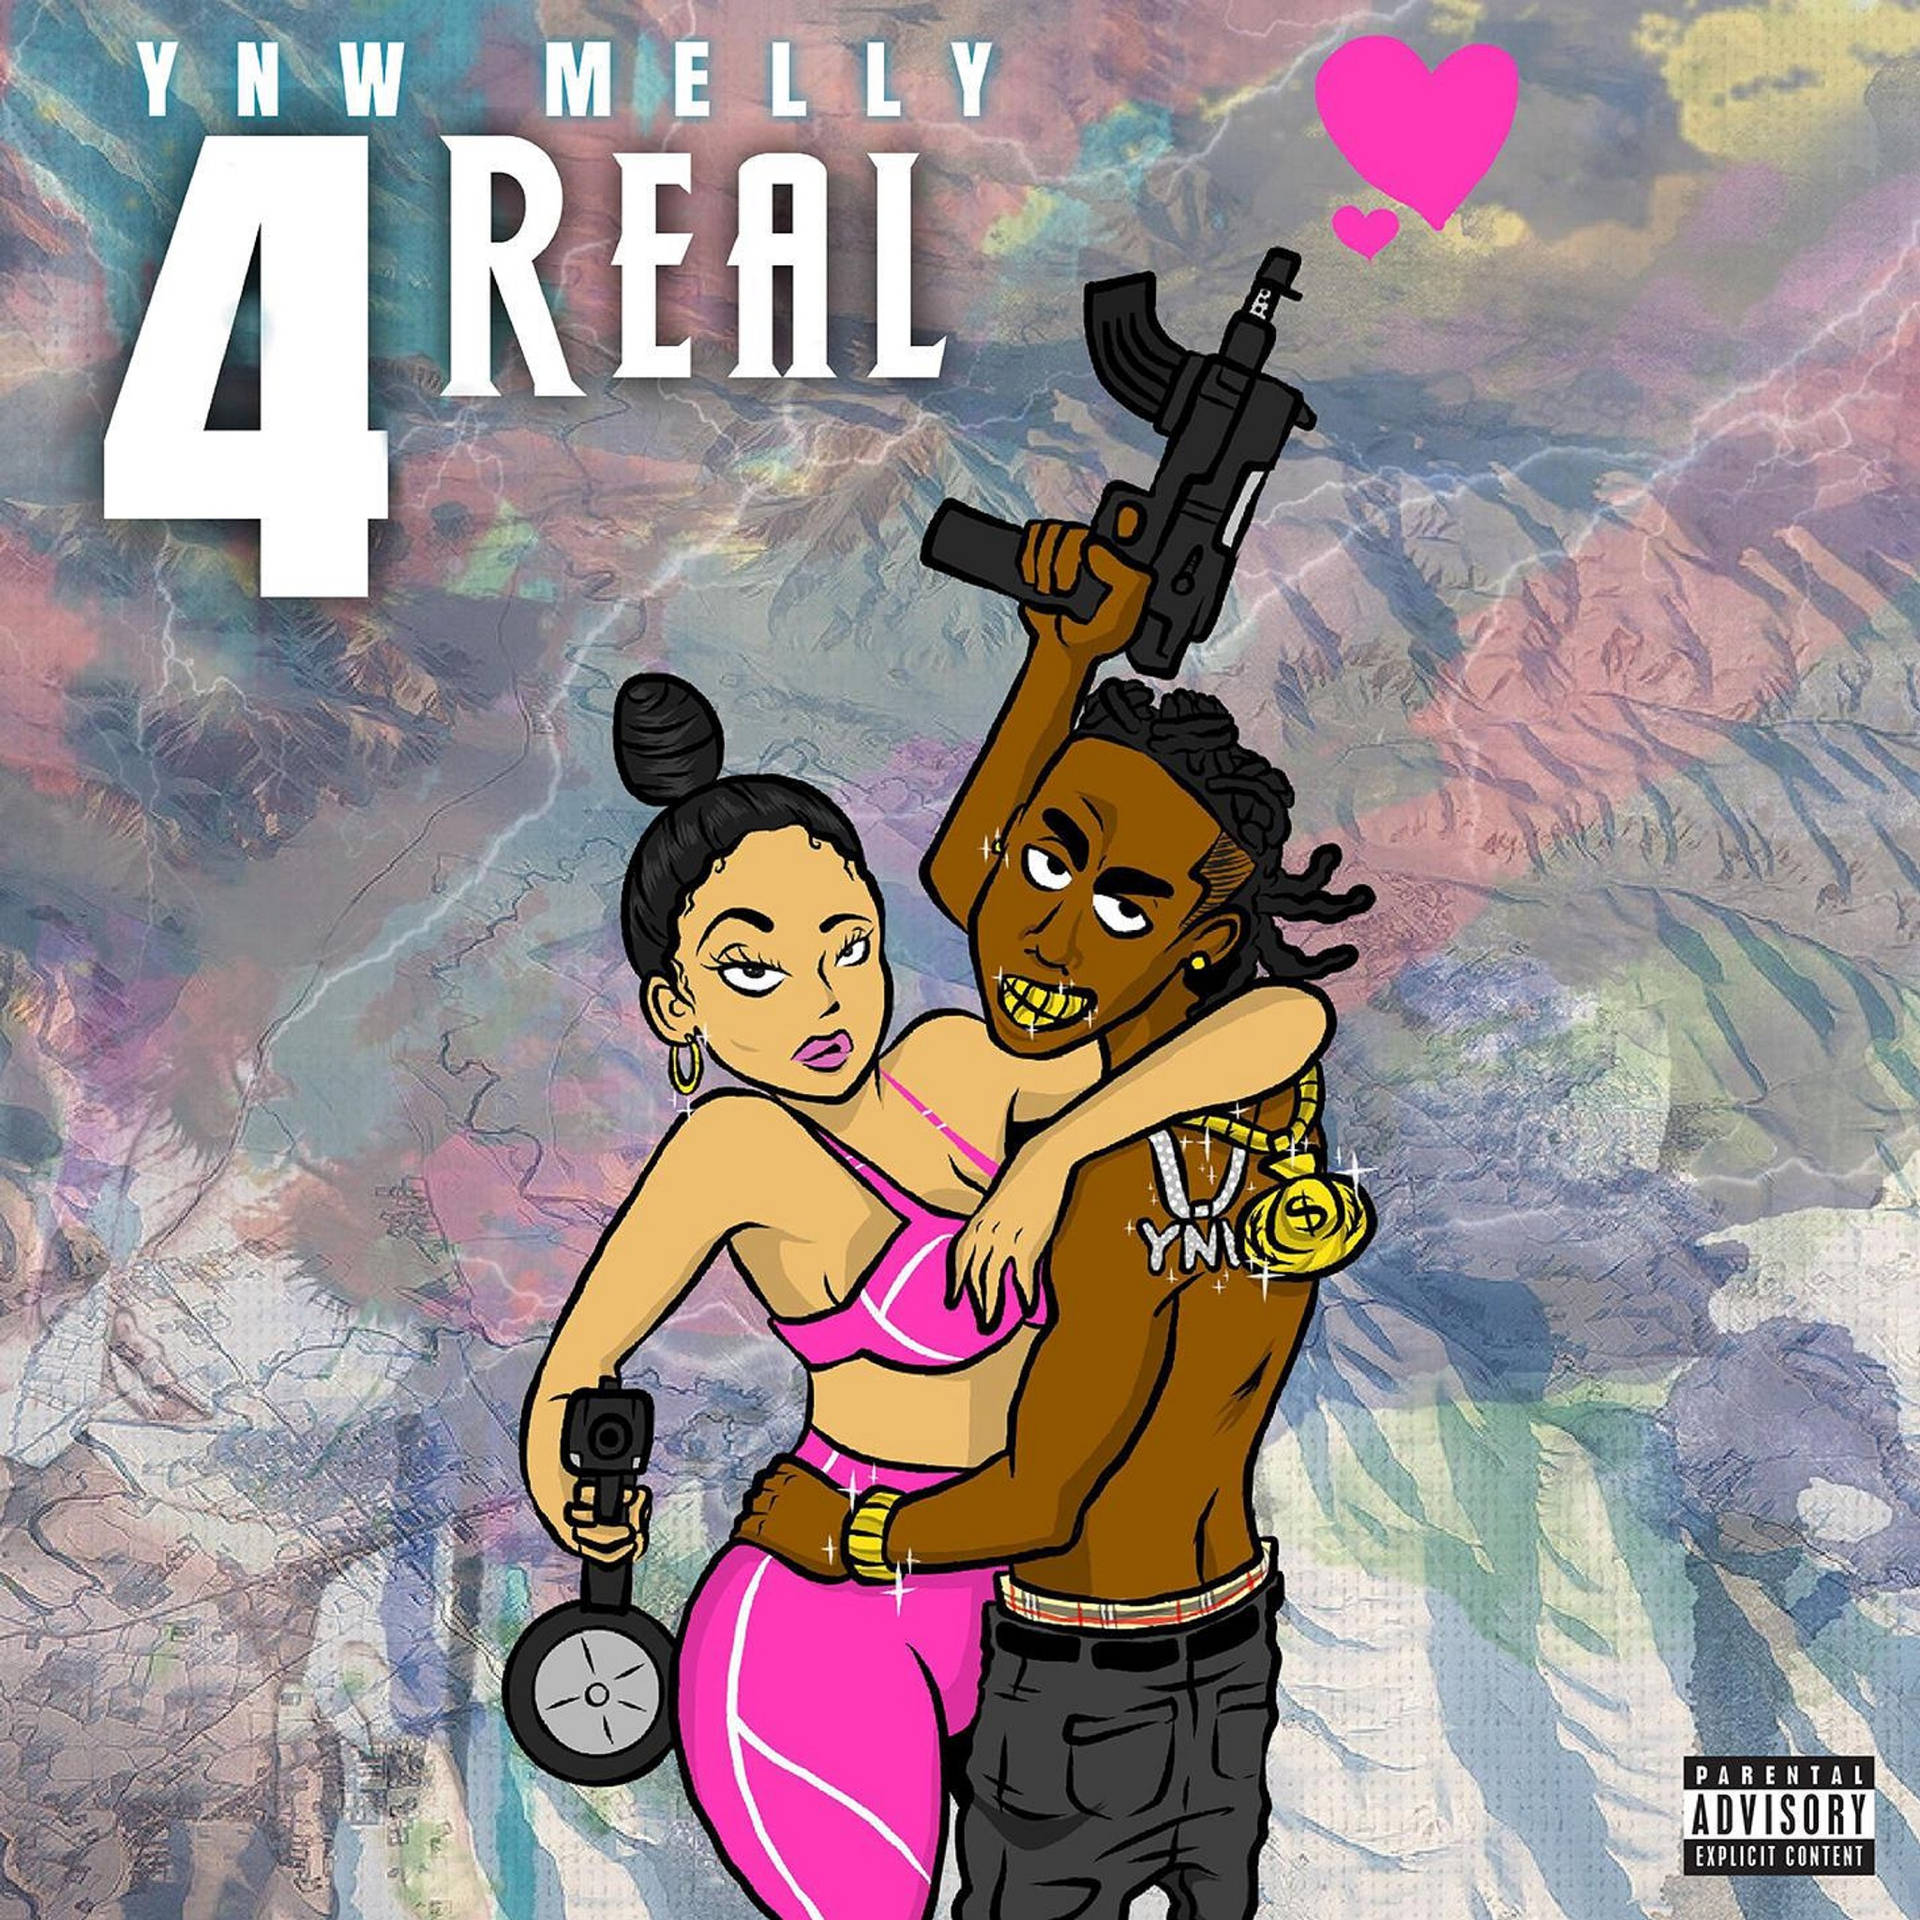 Ynw Melly 4 Real Background